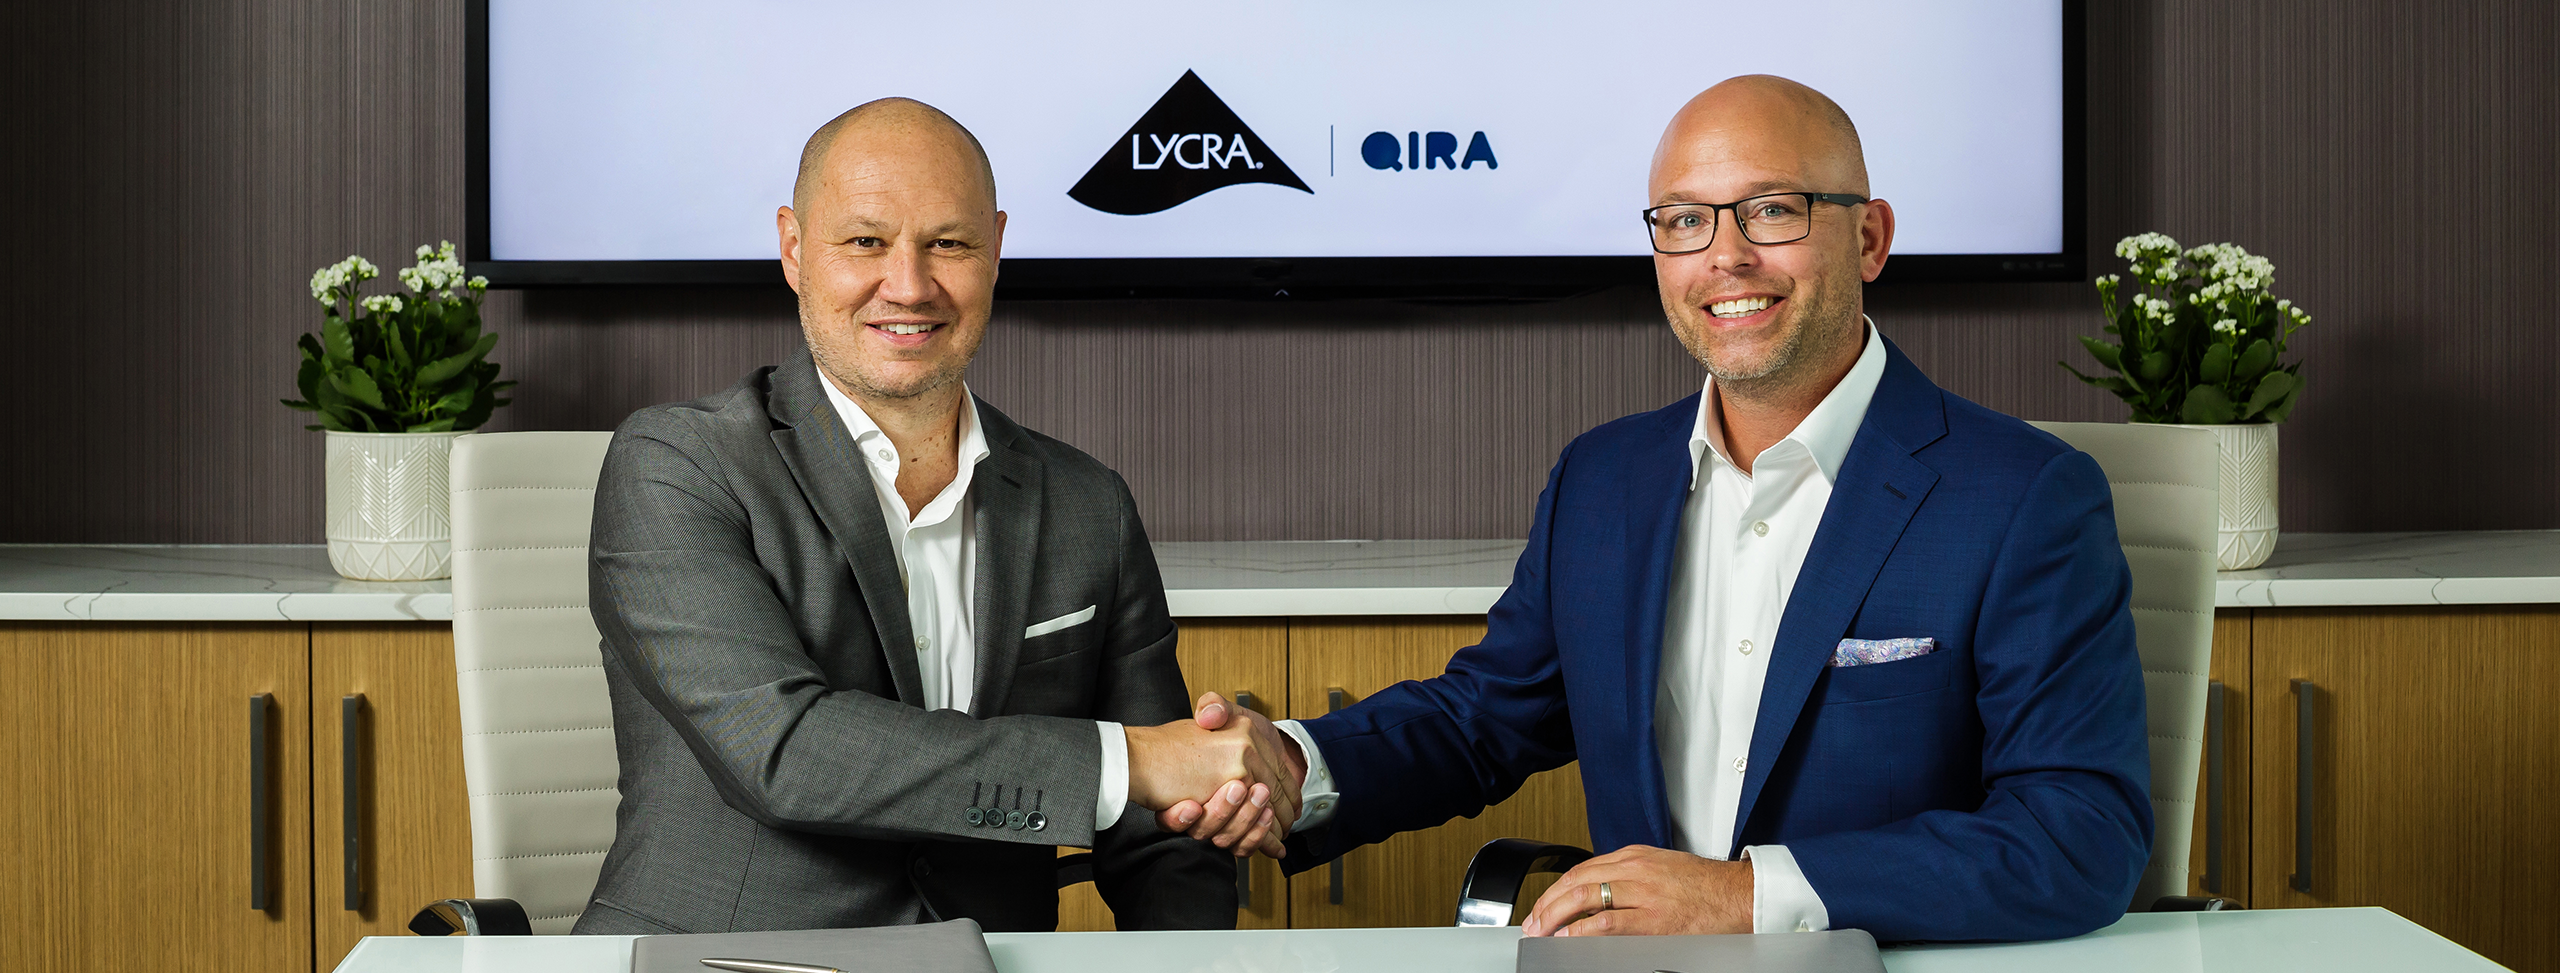  The LYCRA Company Announces Collaboration with Qore® to use QIRA® for next Generation Bio-Derived LYCRA® Fiber at Scale